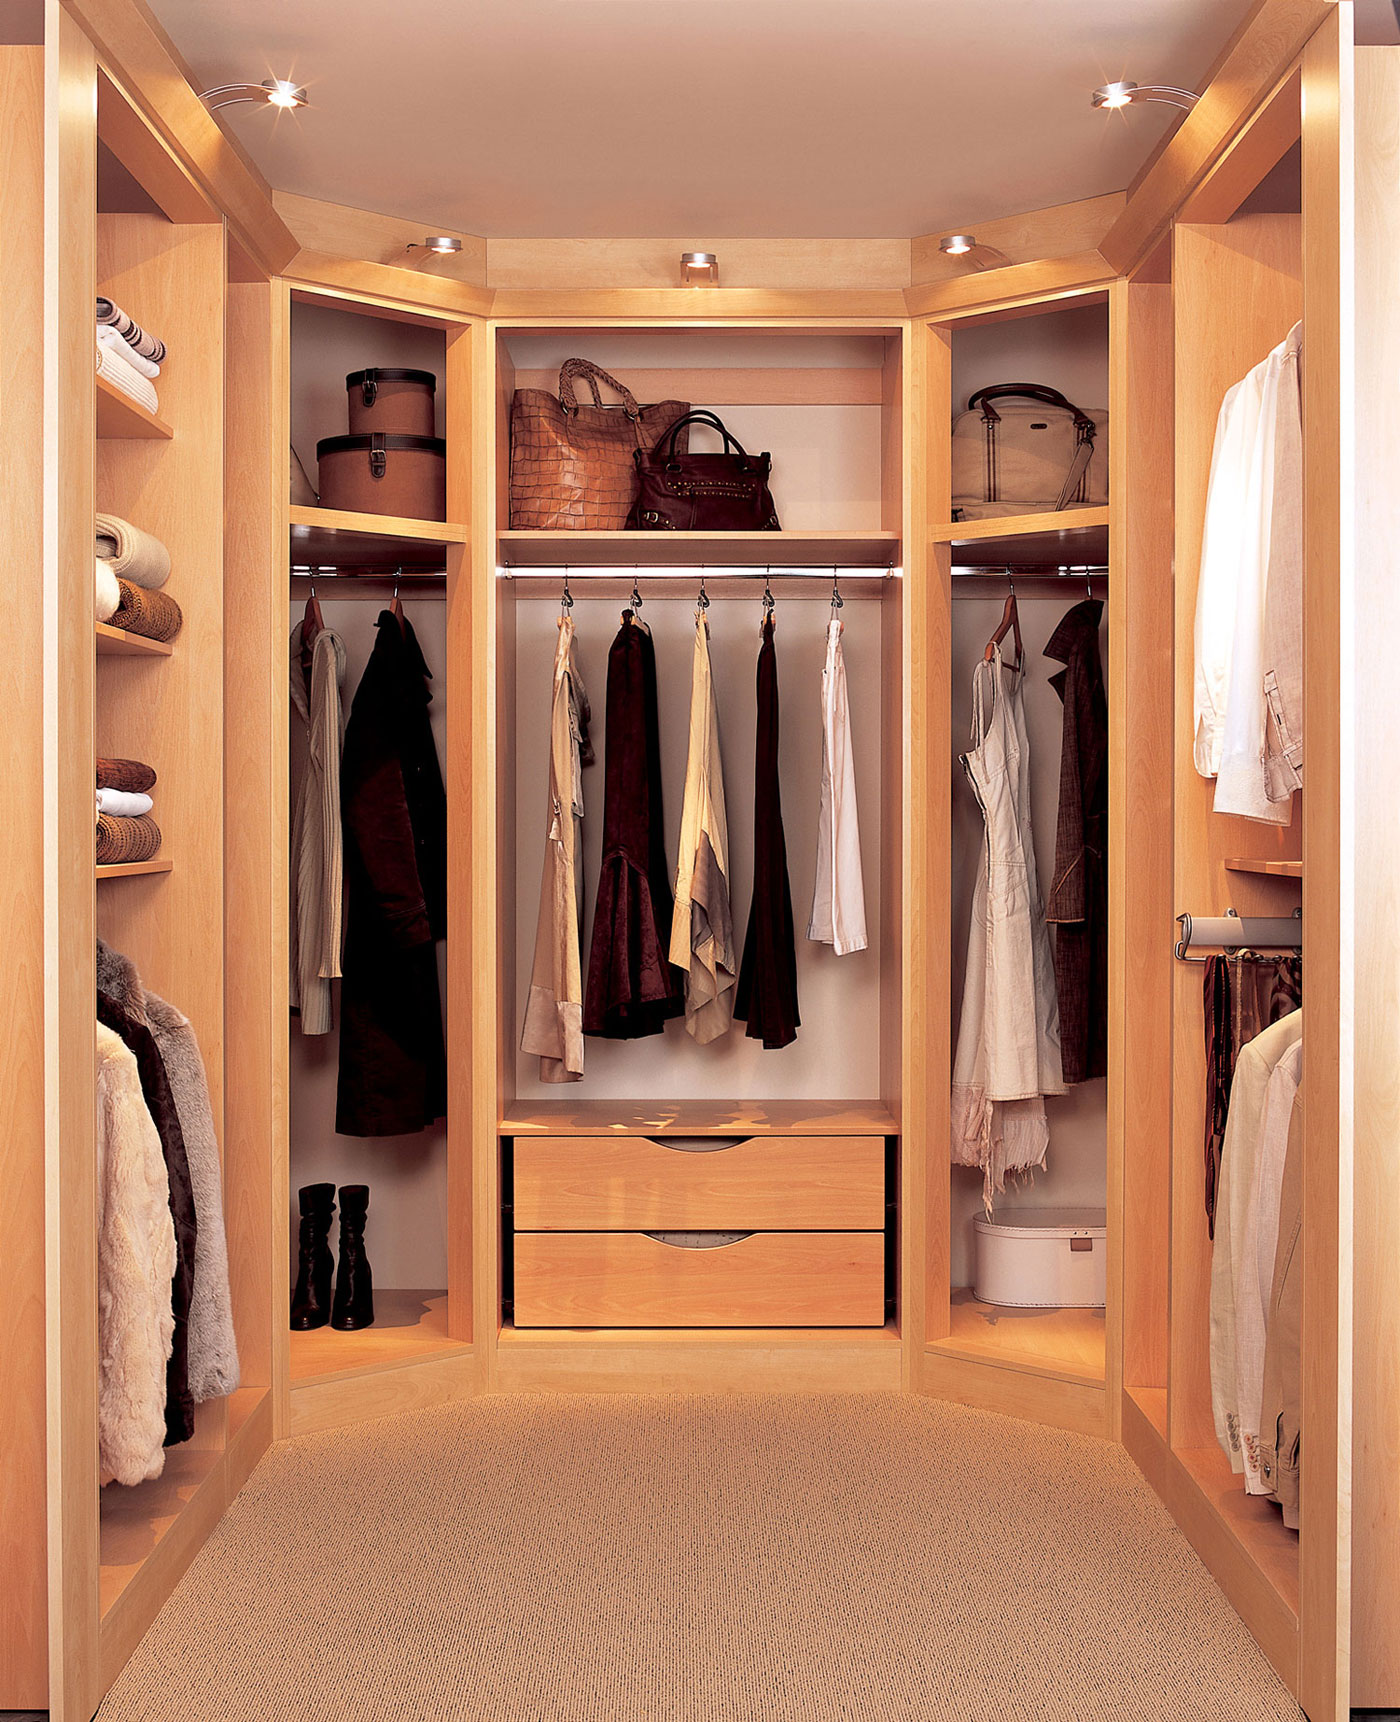 Small Walk Ideas Modern Small Walk In Closet Ideas Using Wooden Shelving Design And Modern Lighting Decor For Inspiration Decoration 10 Cozy Small Walk In Closet Ideas To Strike Your Fancy